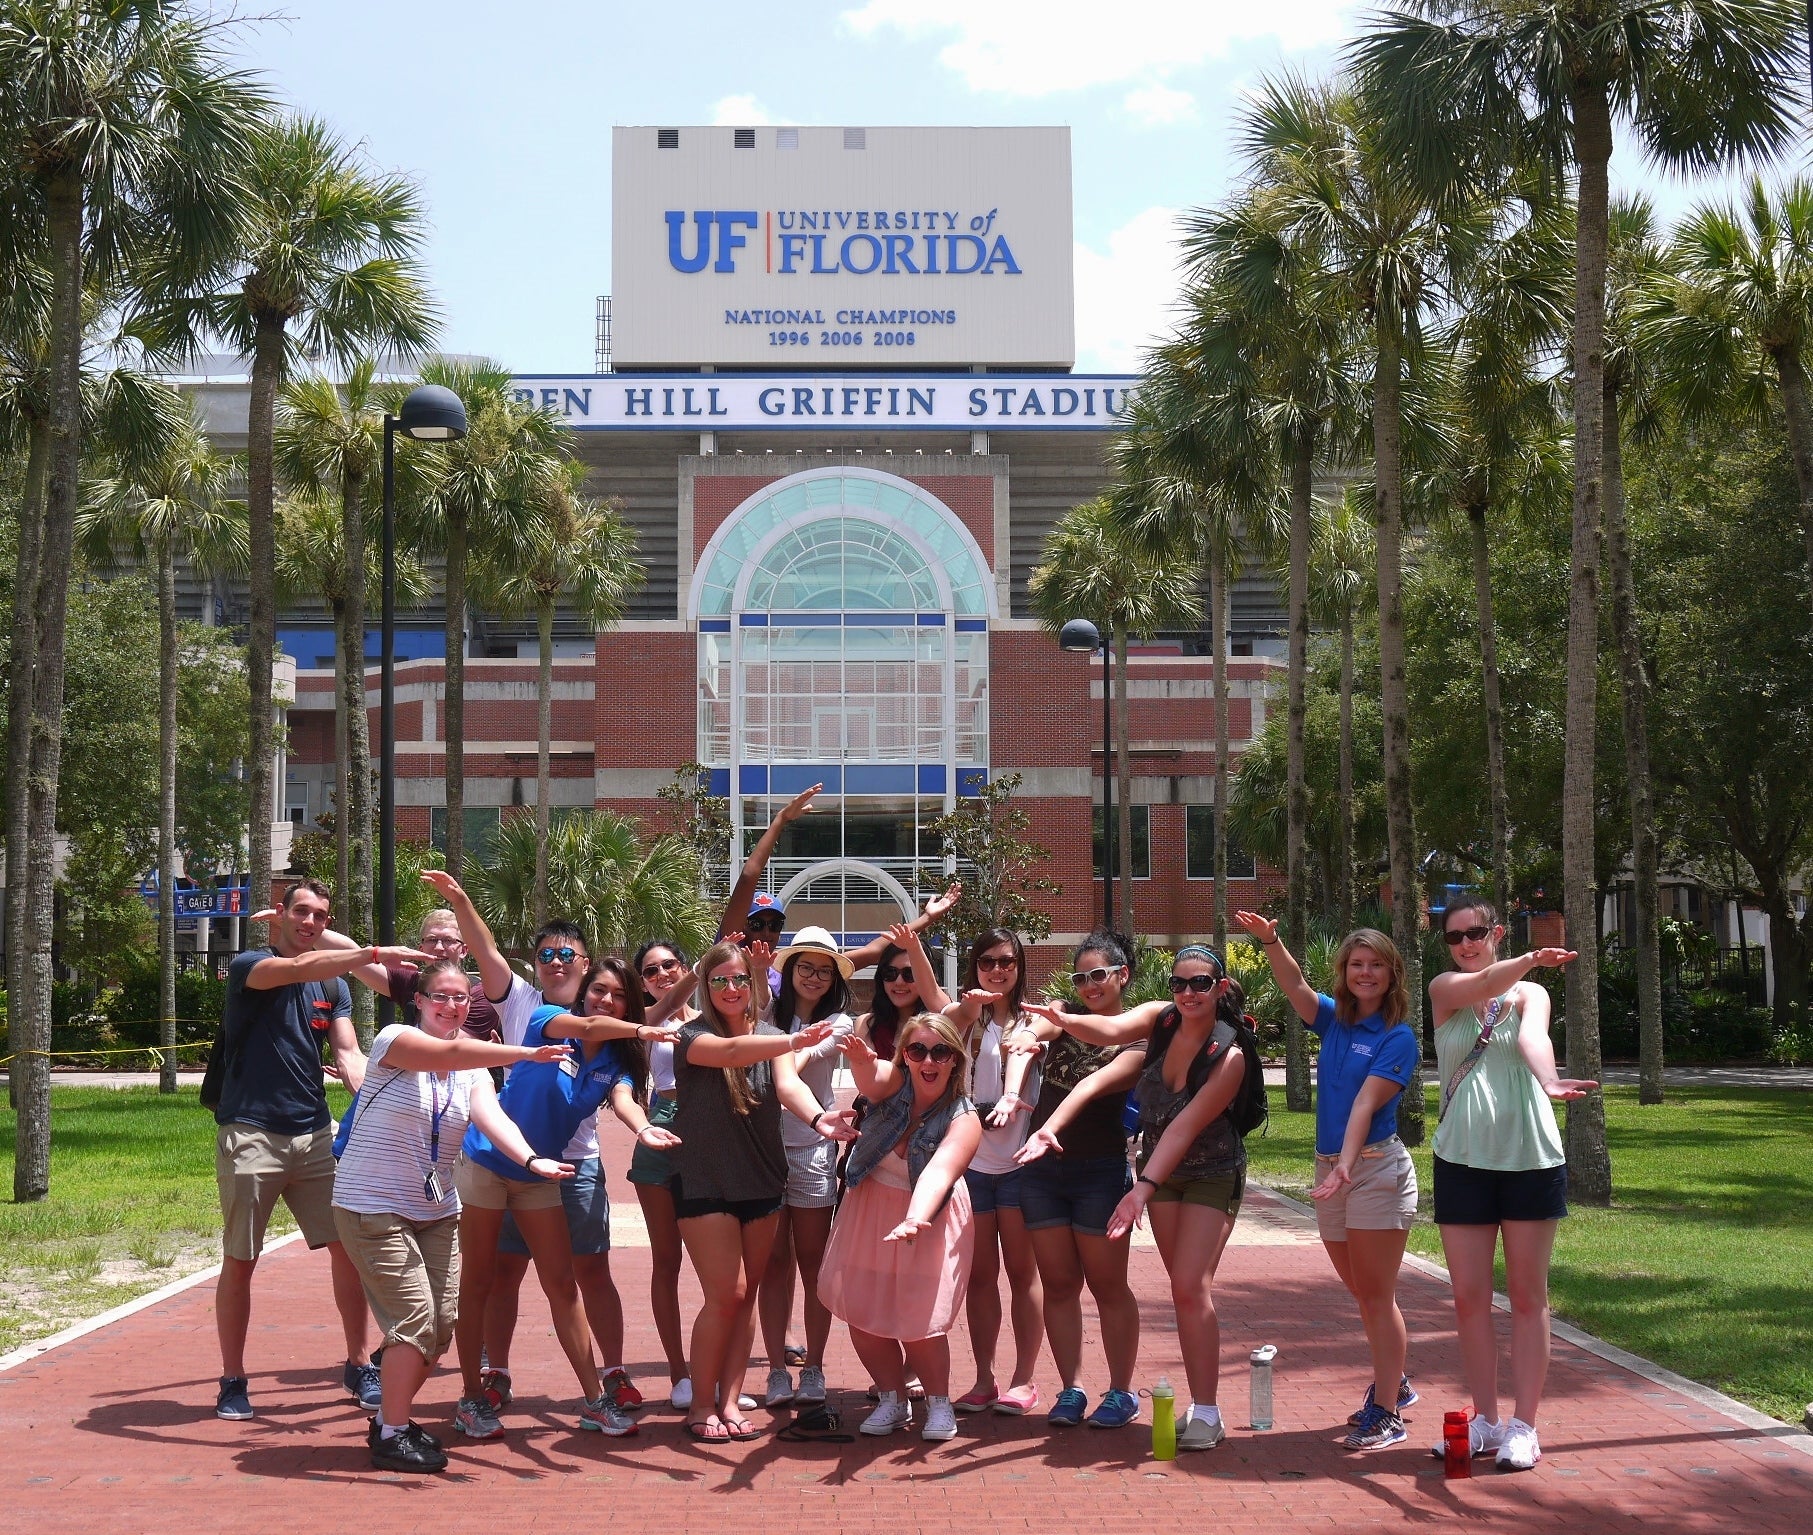 Students at the University of Florida